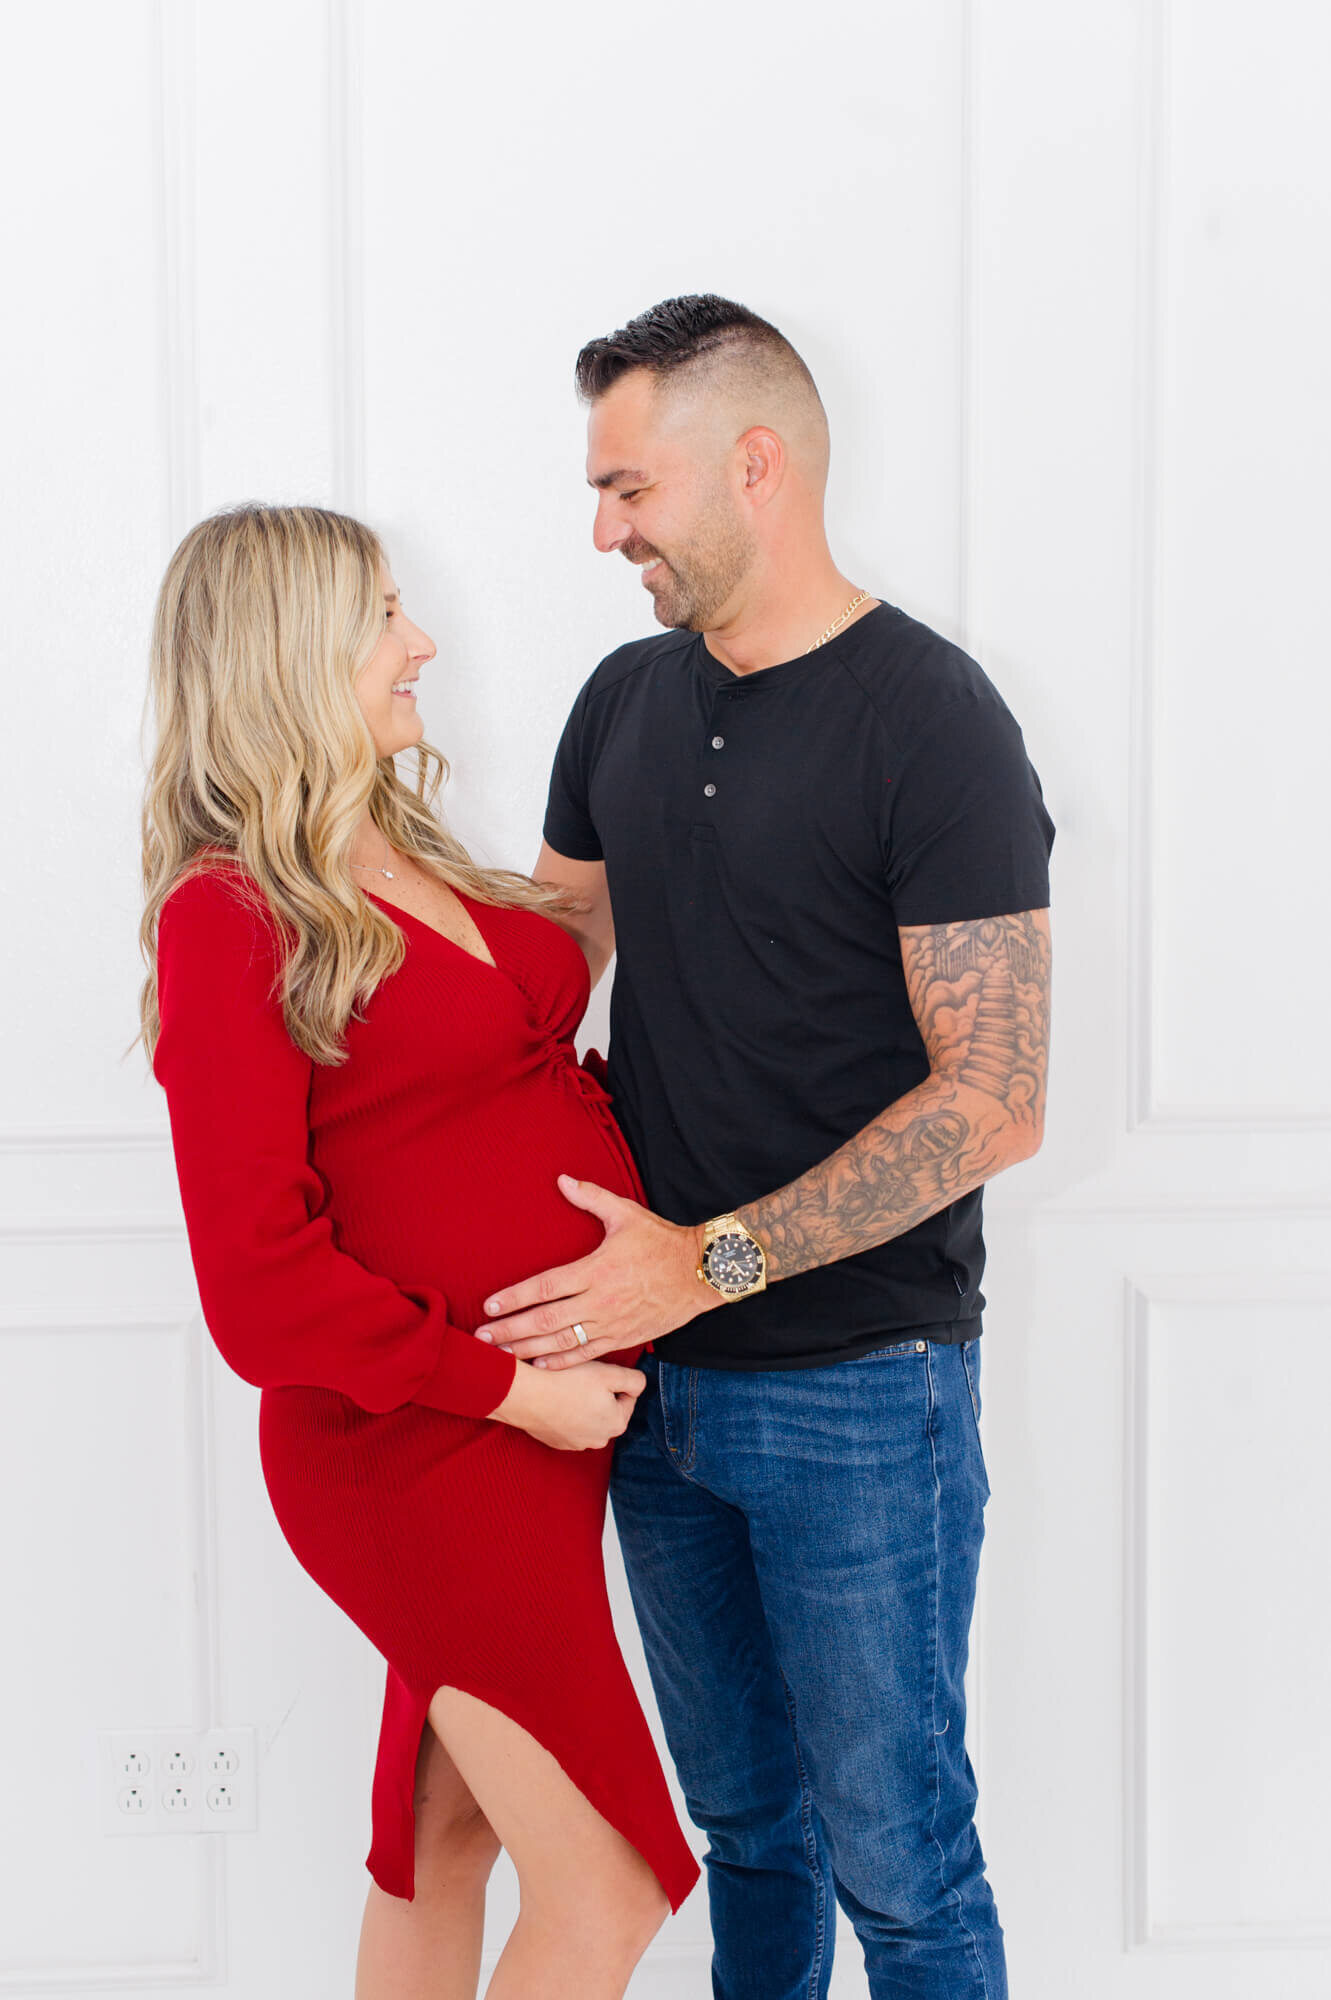 Expectant parents pose smiling at each other in the studio